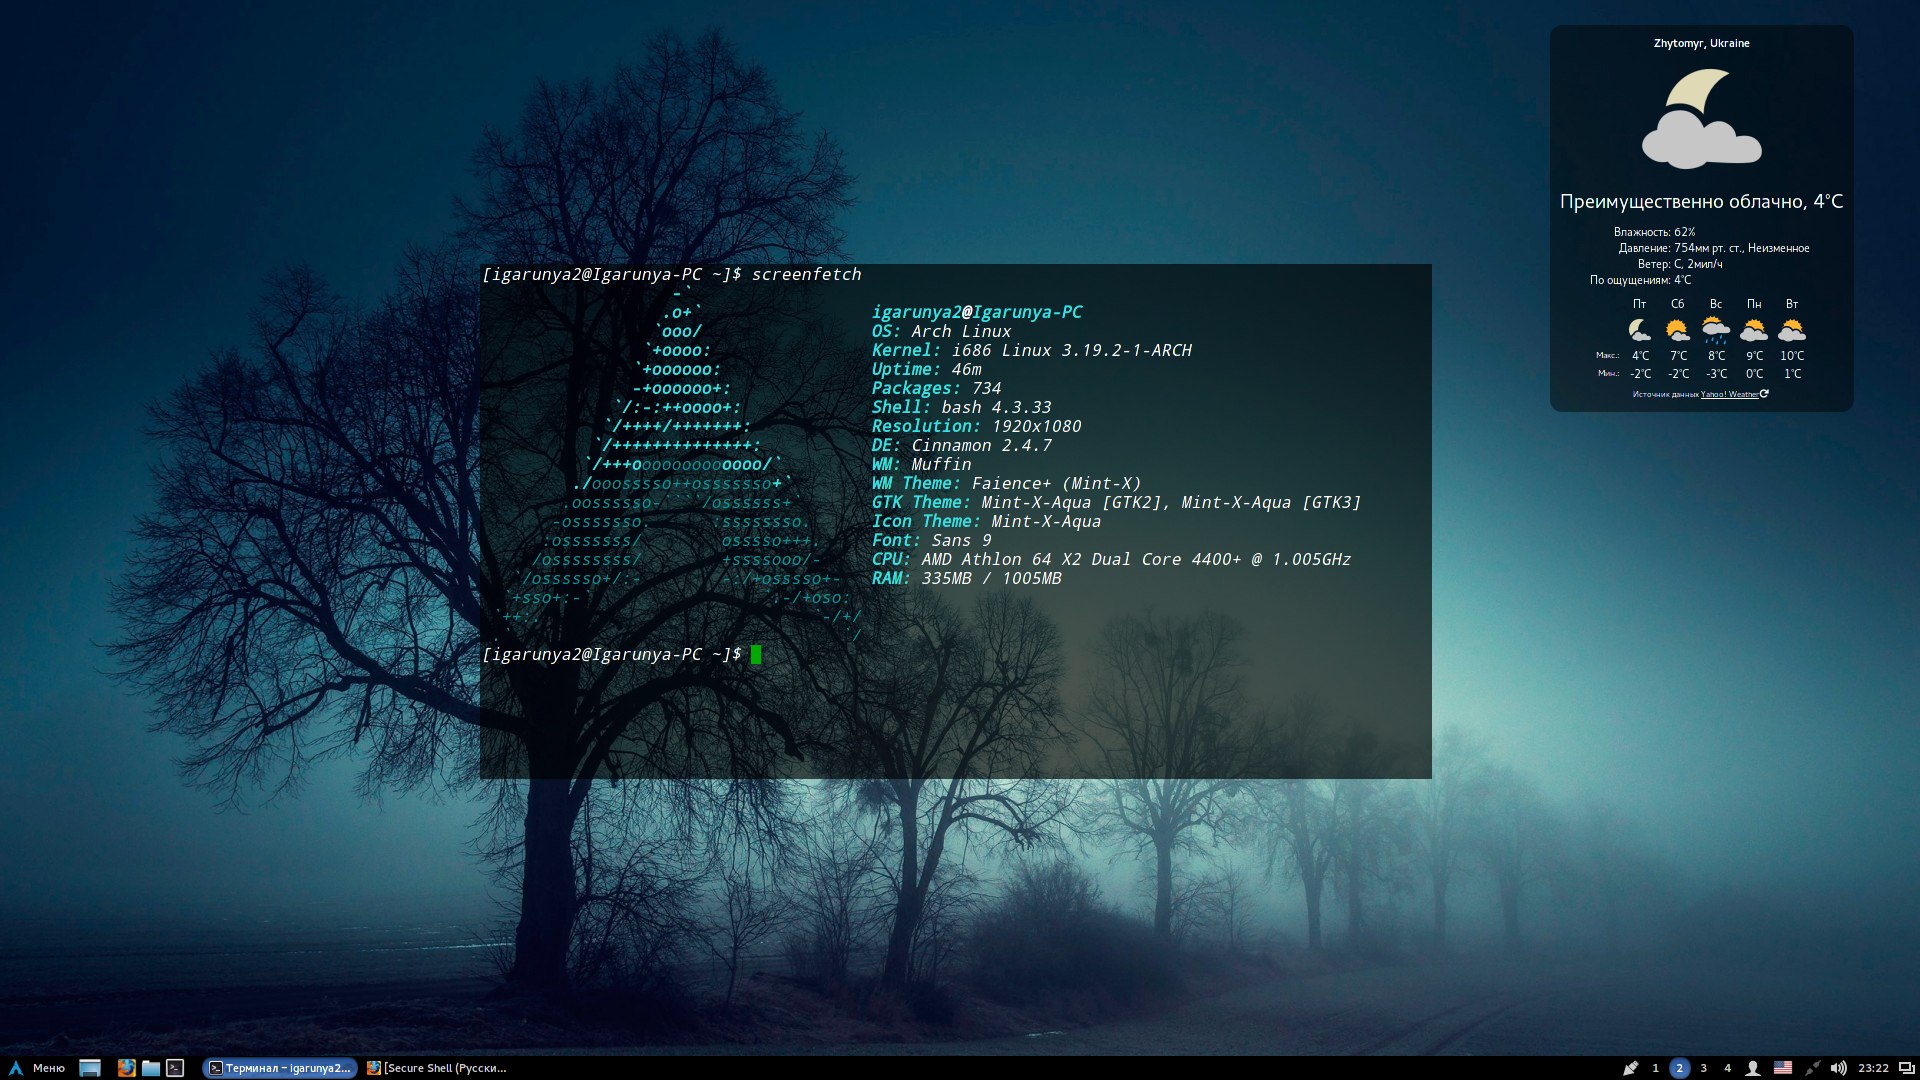 arch-linux-2015-08-01-is-now-available-for-download-powered-by-linux-kernel-4-1-488251-2.jpg